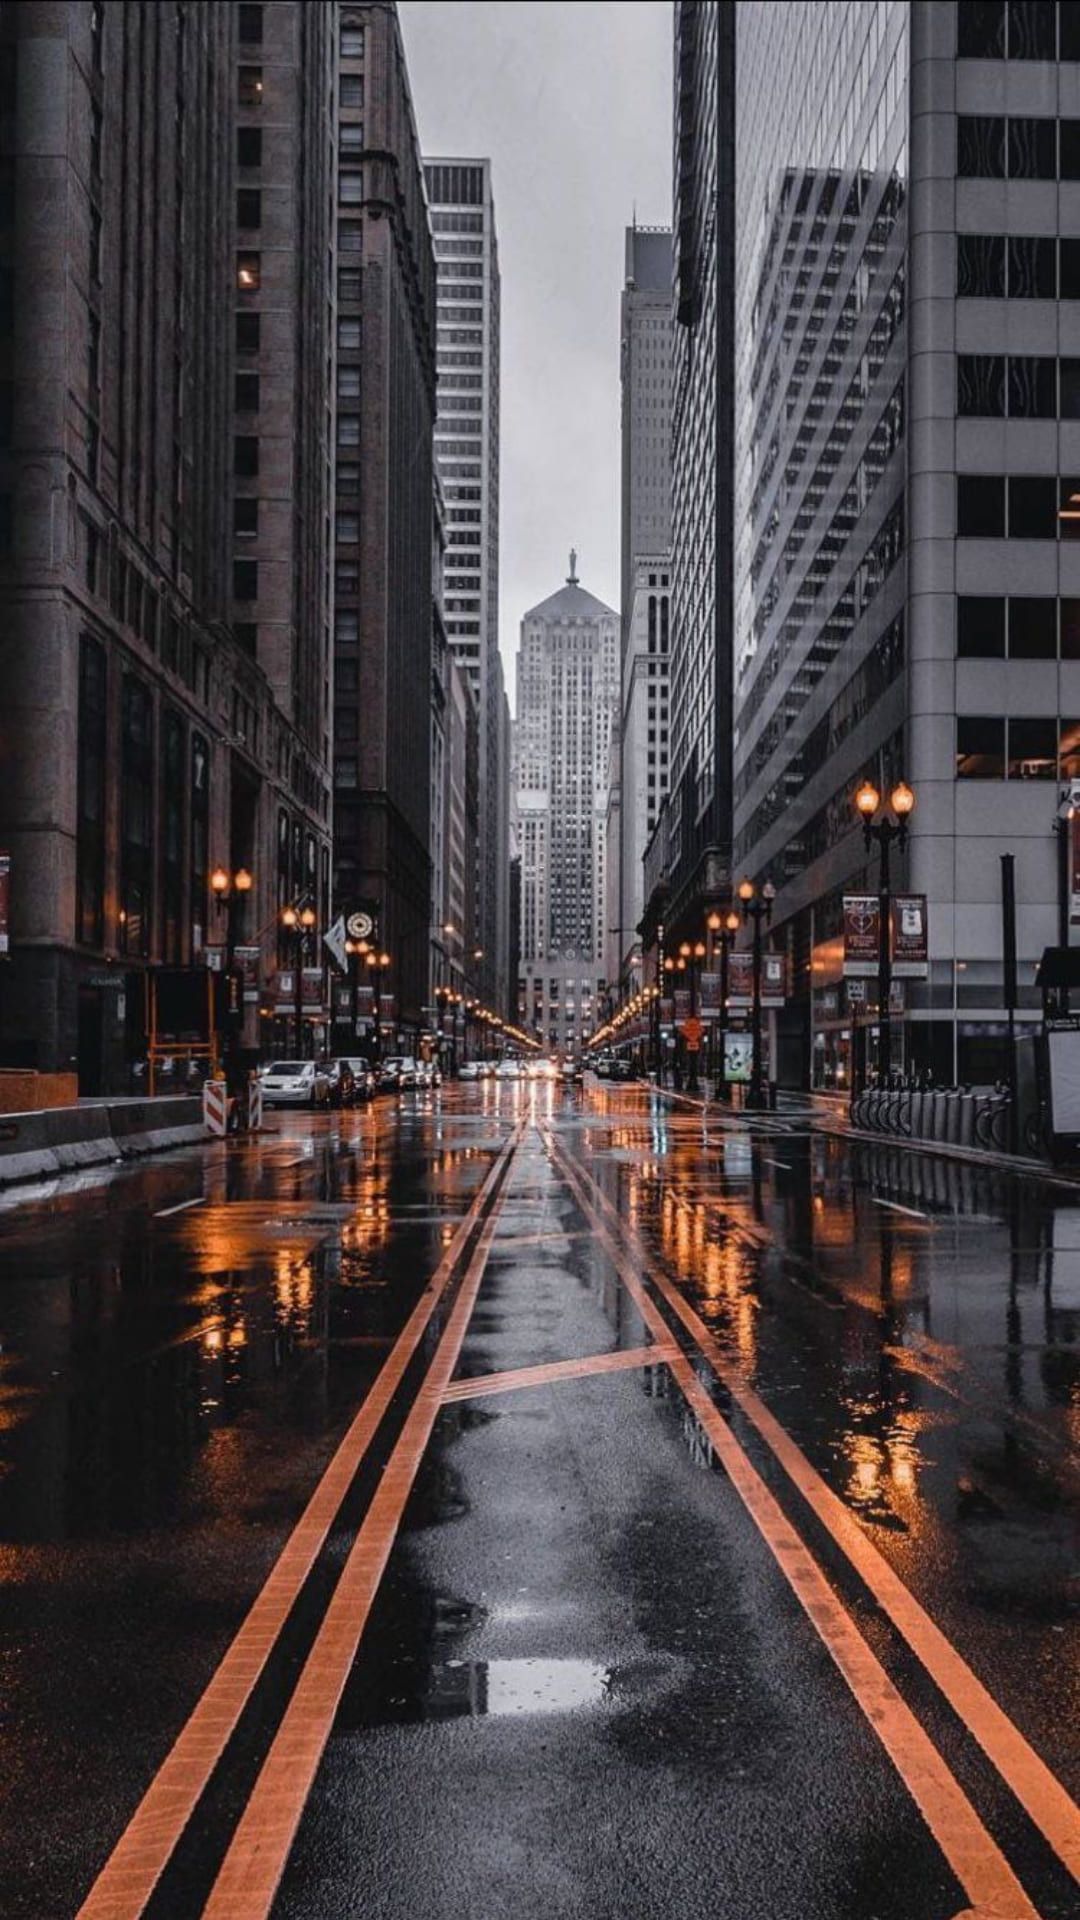 A street with rain and cars on it - New York, city, road